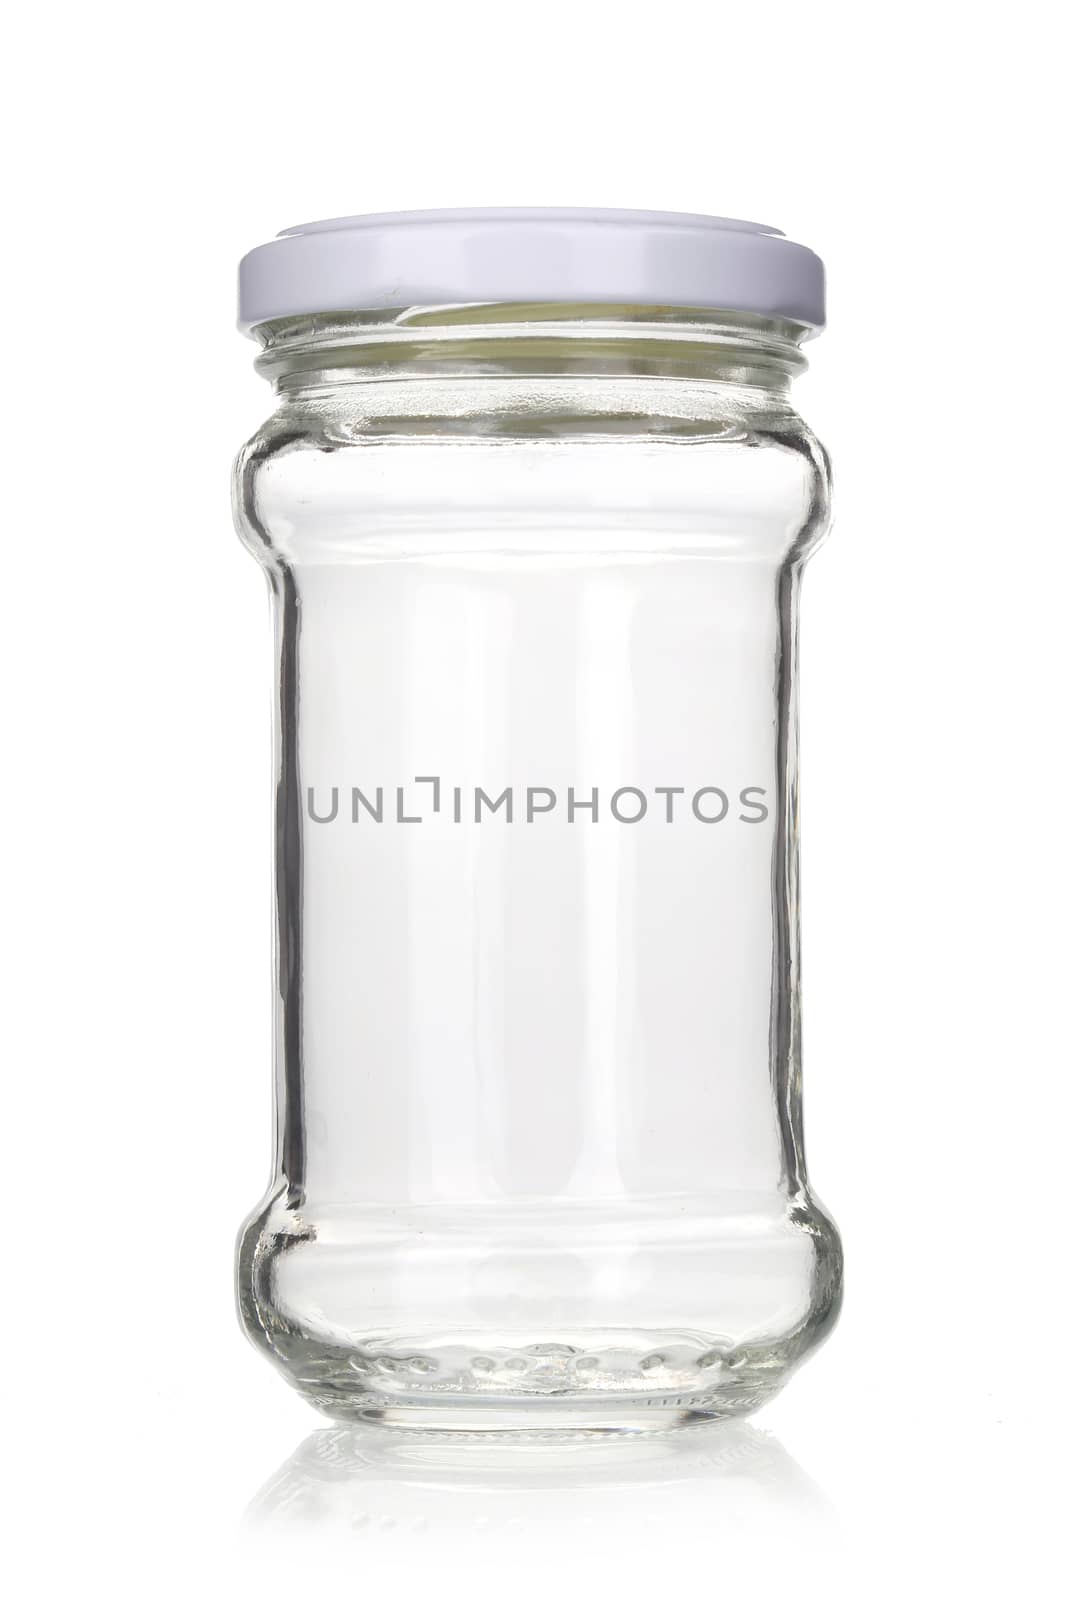 Closed empty glass jar. Isolated on white background.